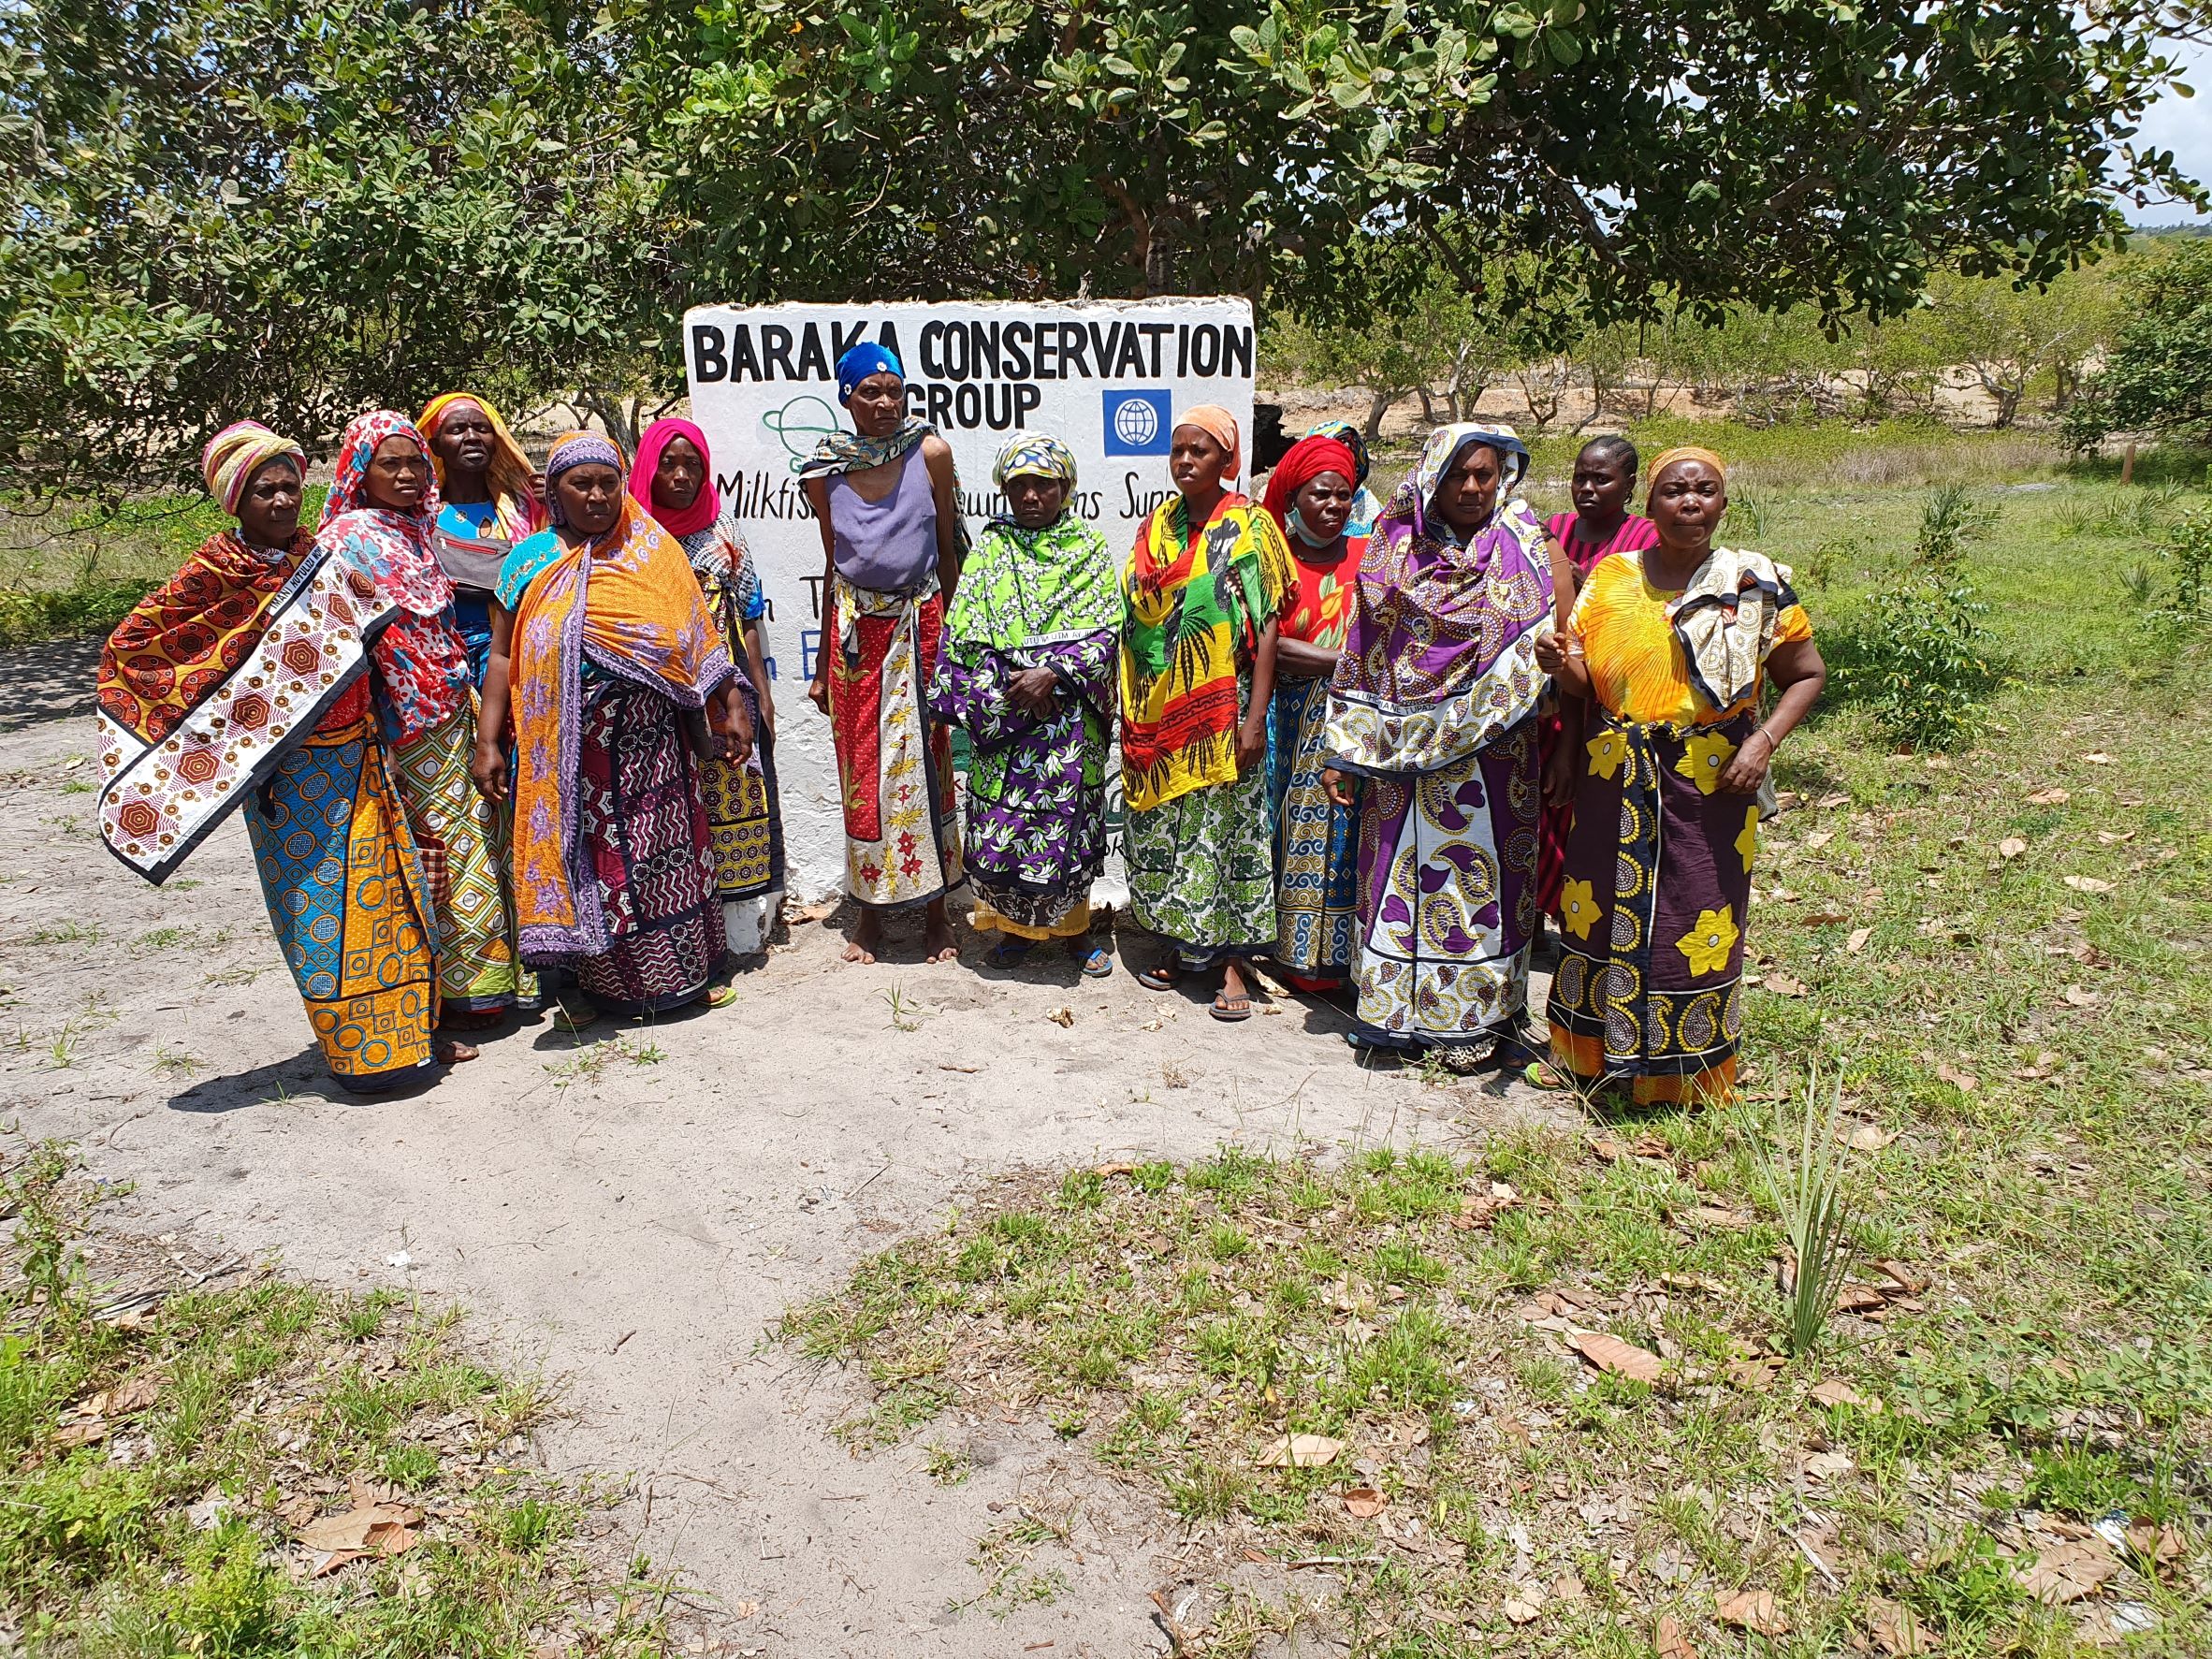 a group of 12 women in traditional Kenyan clothing (colorful dresses and skirts with headcoverings) stand in a grassy field in front of a sign that says "Baraka Conservation Group"